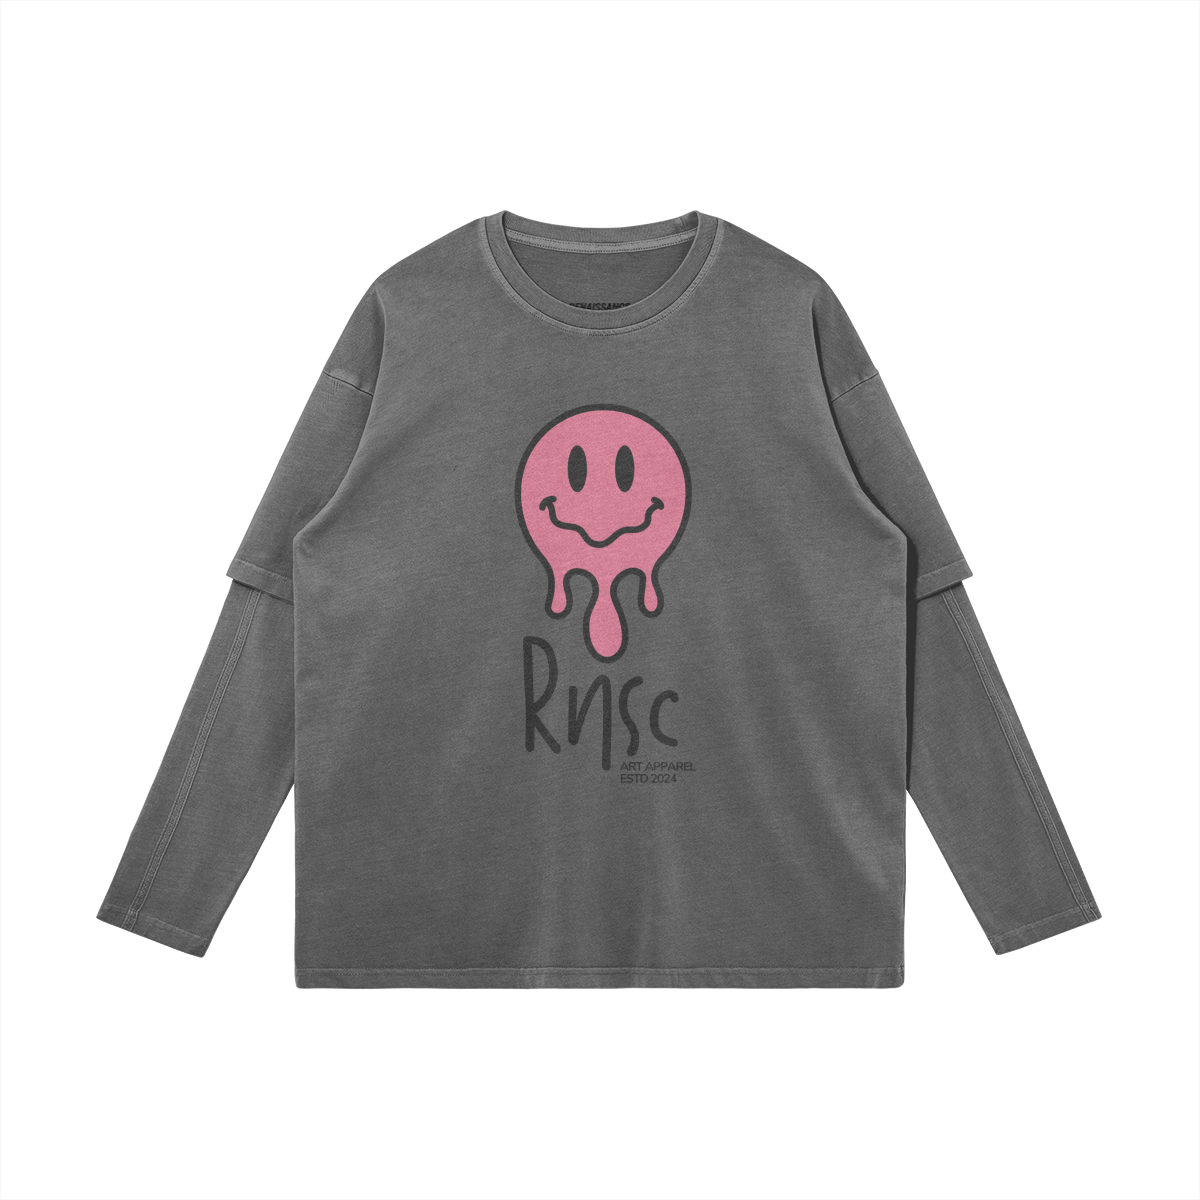 Renaissance Rnsc Pink Smiley Washed Tee